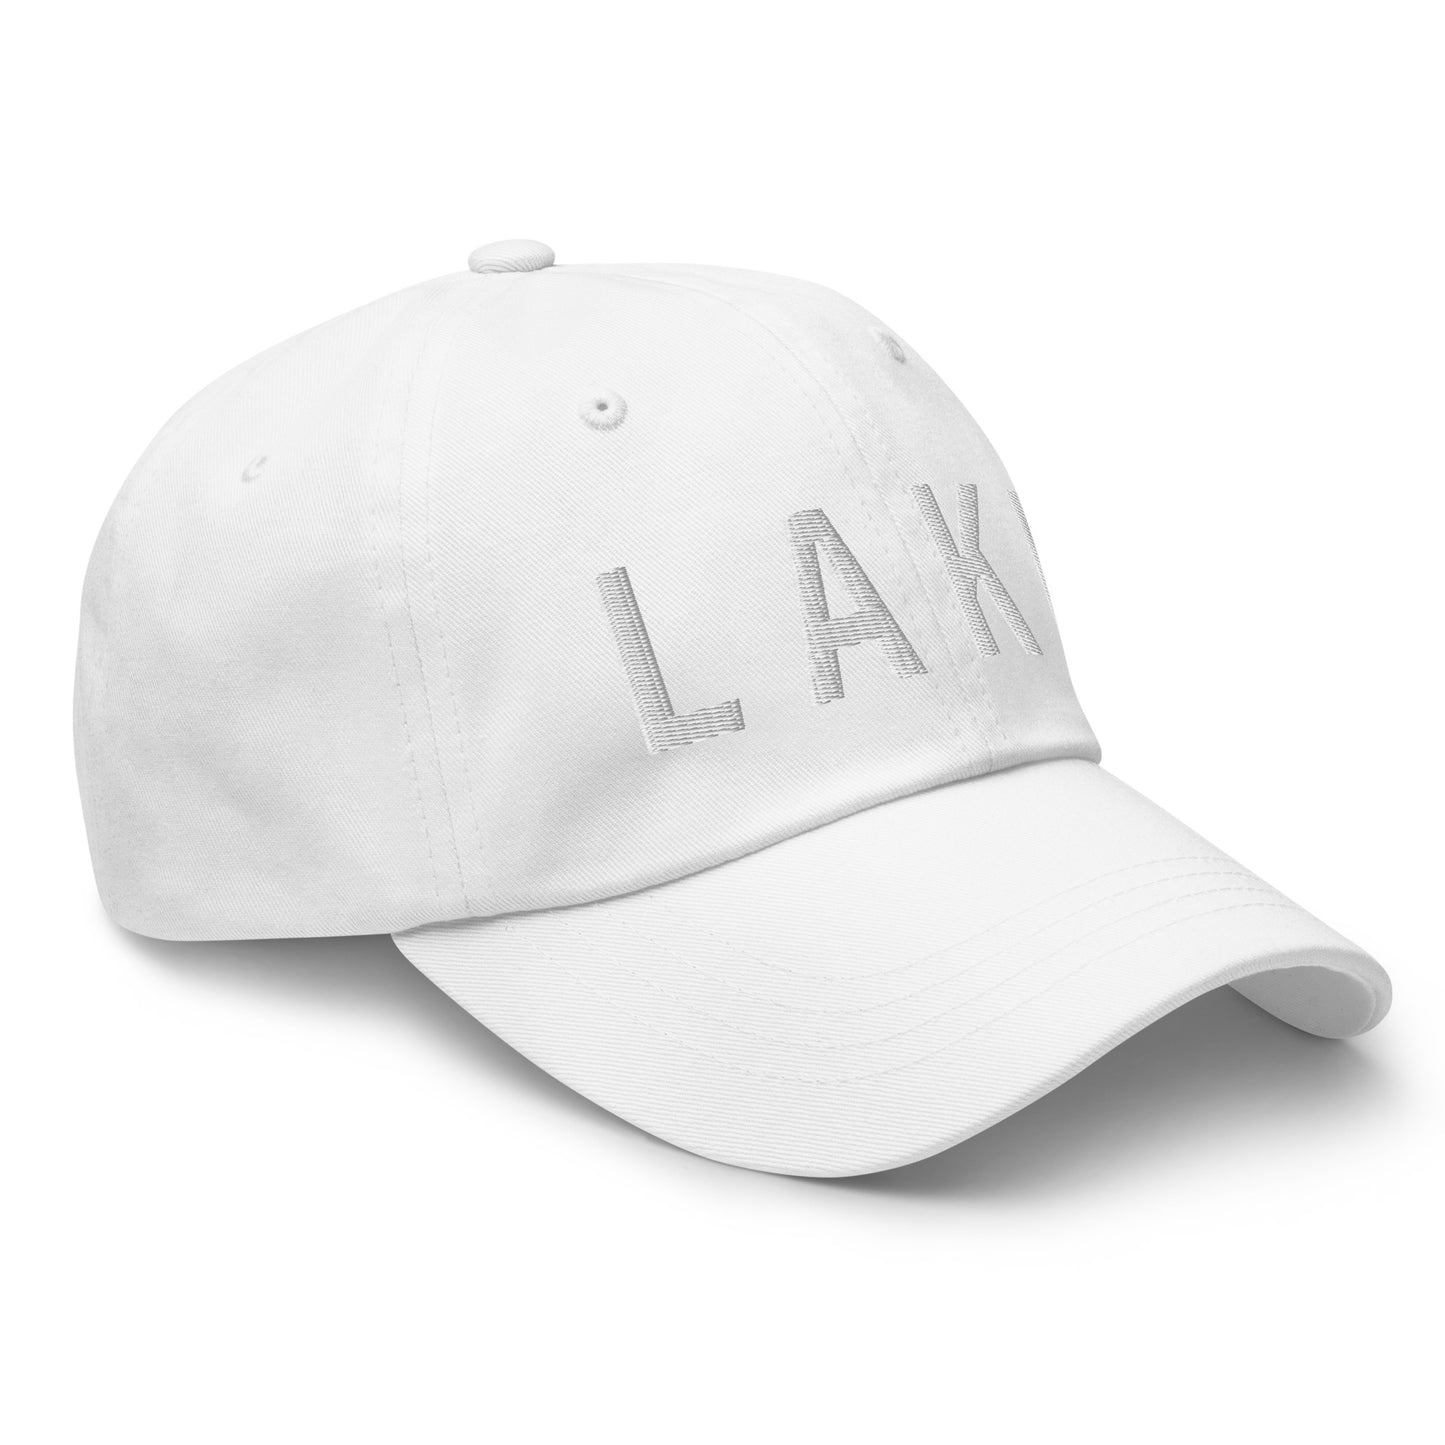 Lake Embroidered Dad Hat